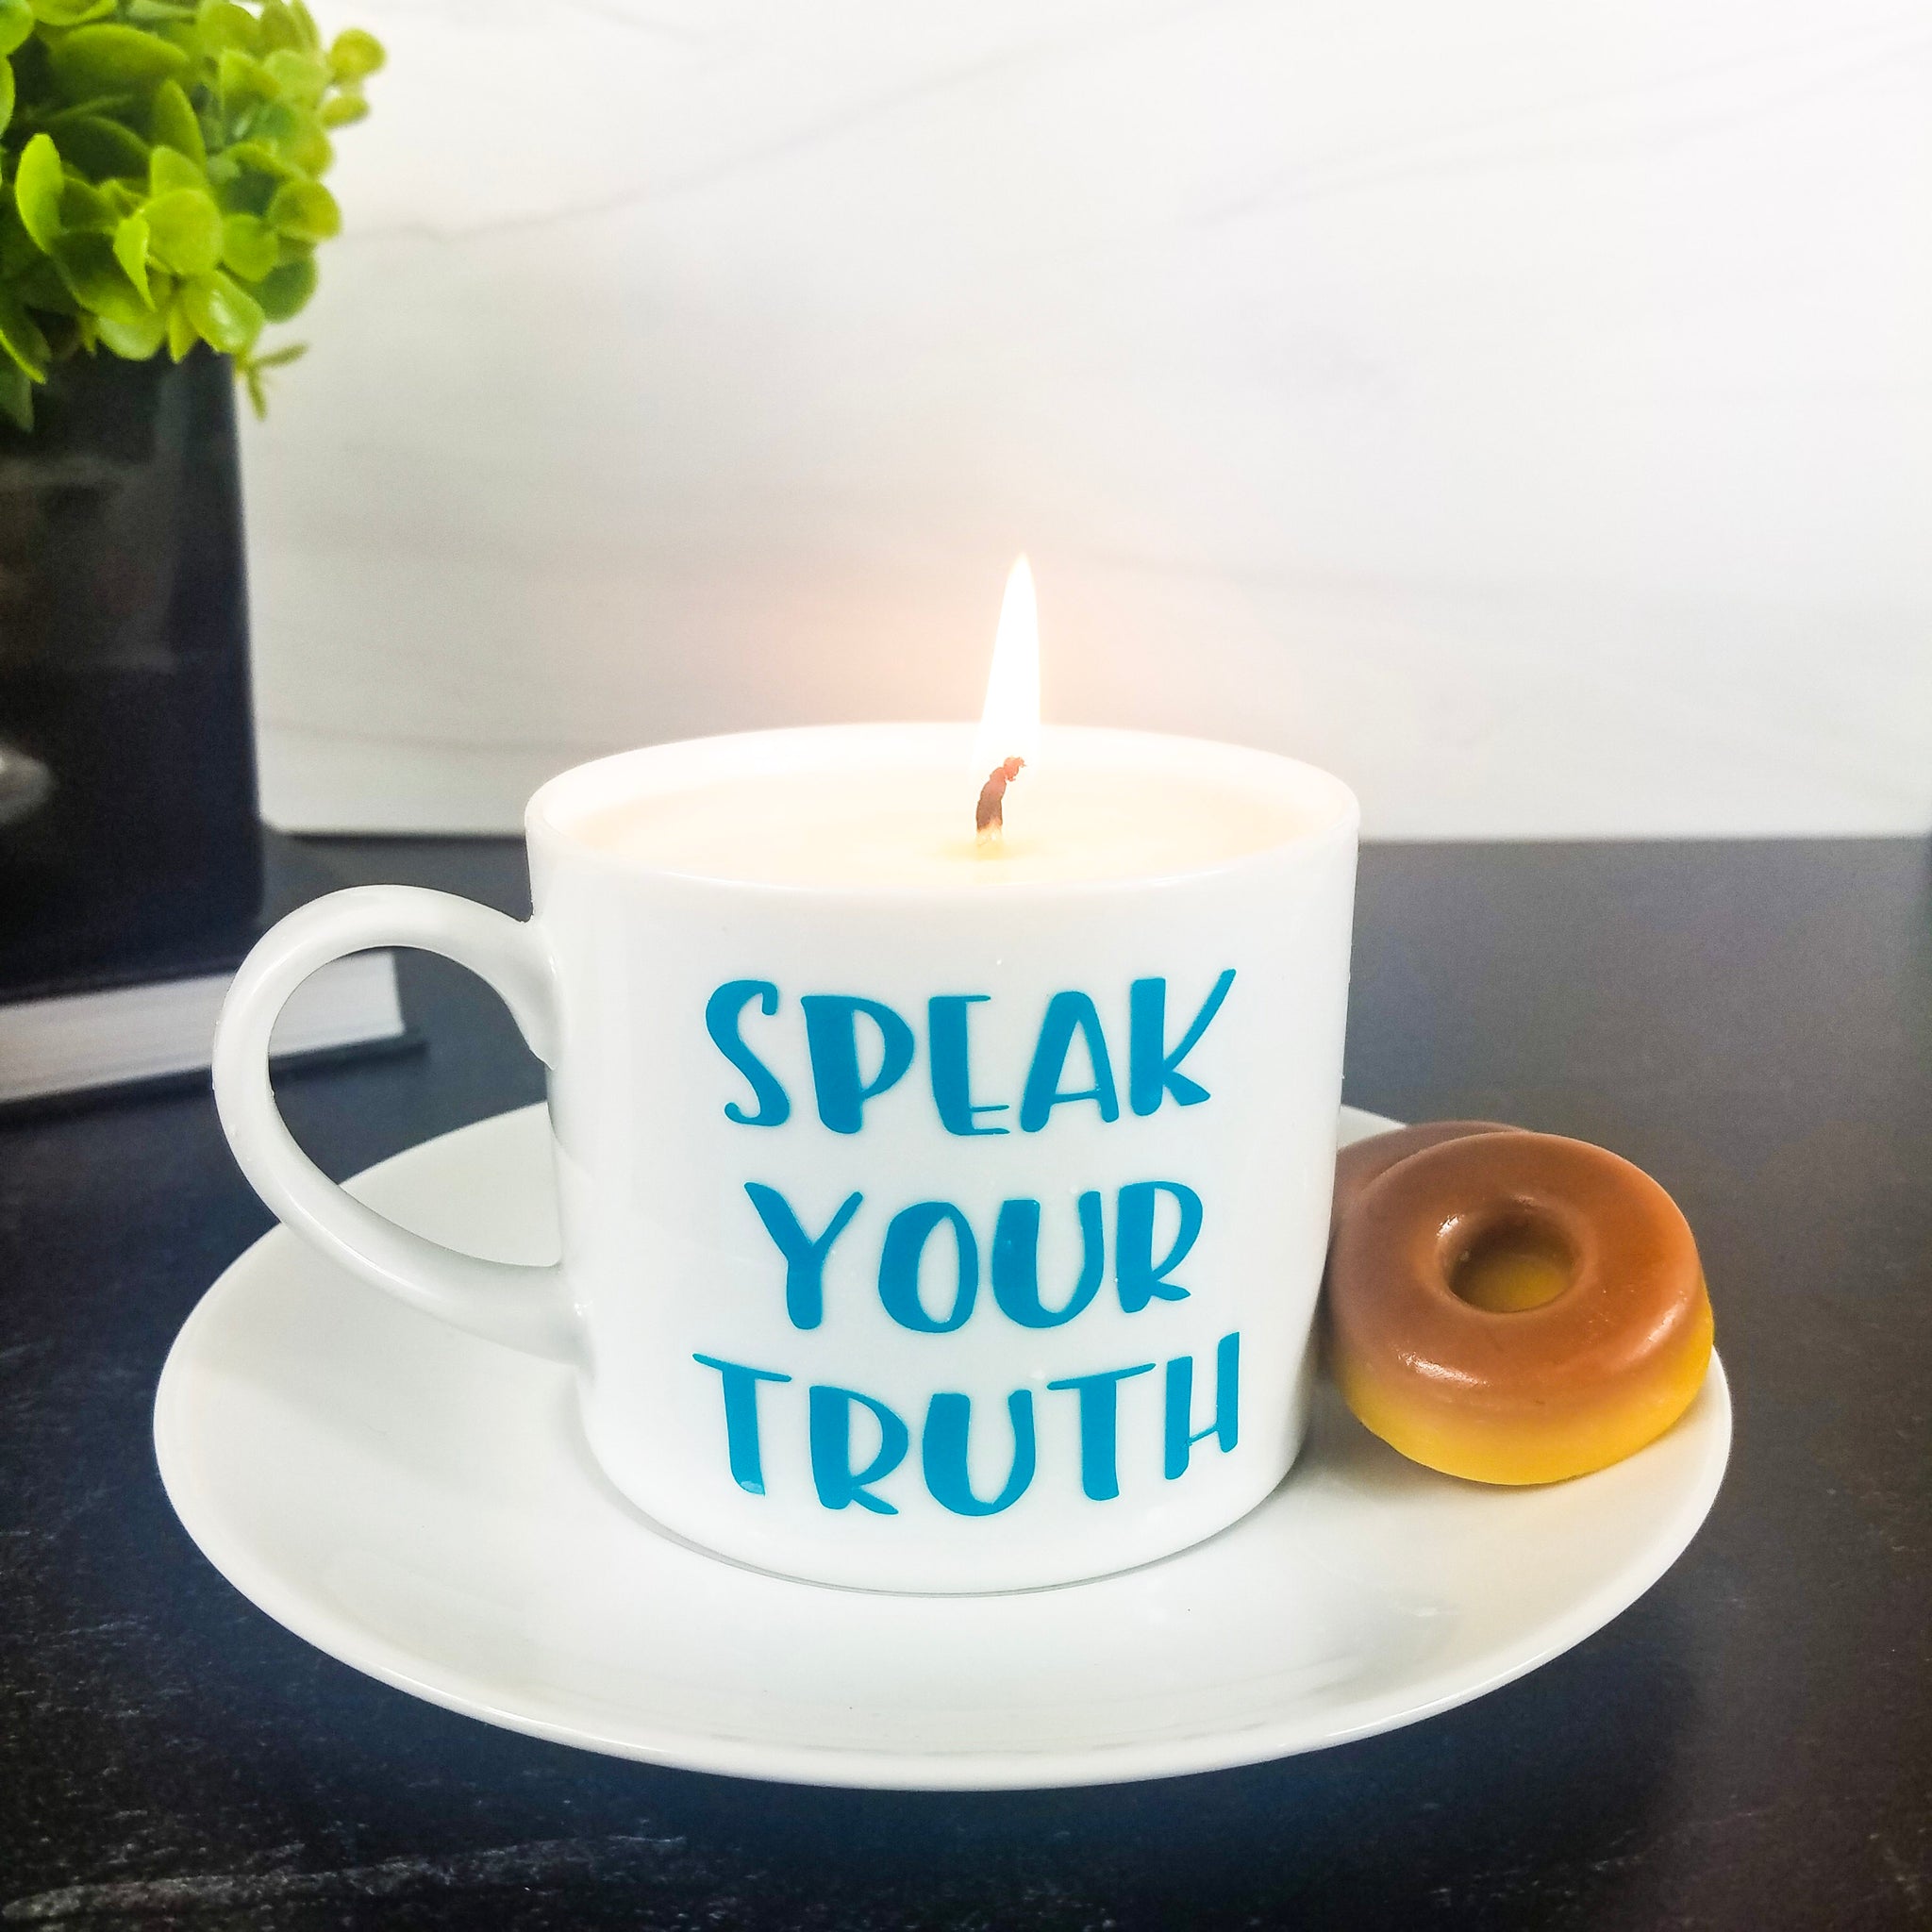 Speak-Your-Truth-Aqua-Coffee-Cup-Candle-doughnuts-wax-melts